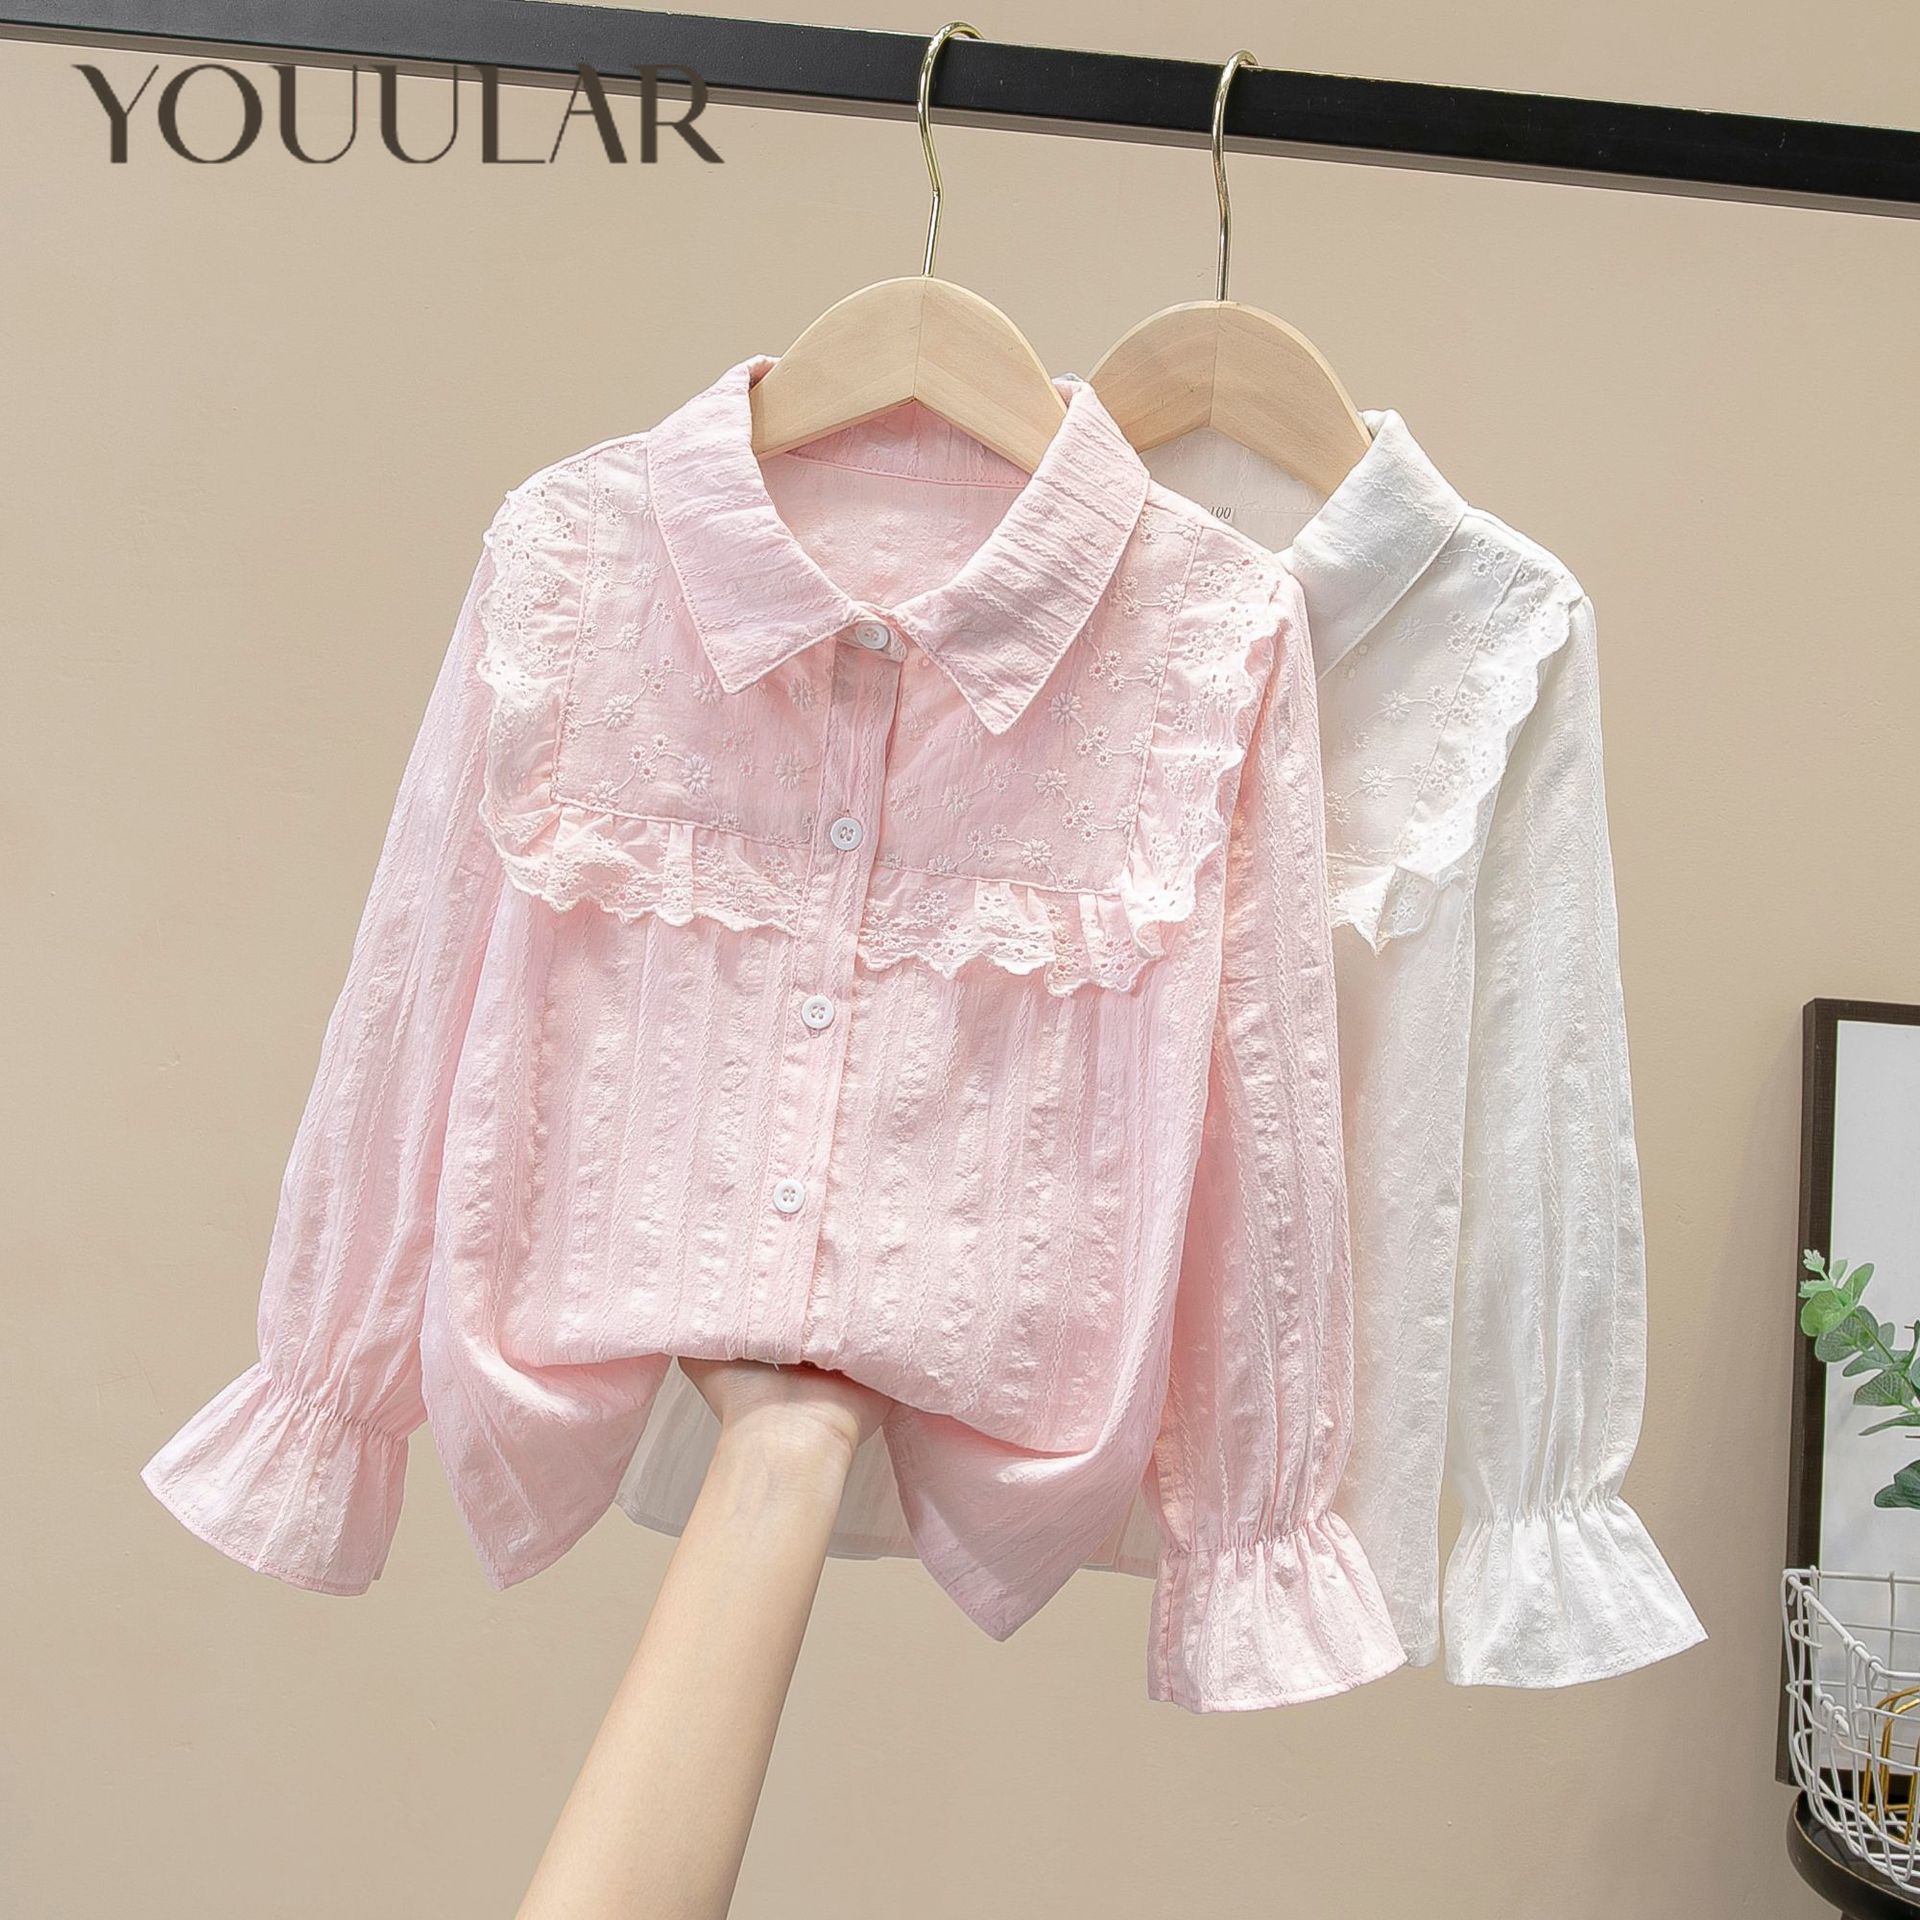 YOUULAR Girls Blouse Spring 2023 New Children's Long-sleeved Lace Tops Kids Wihite Lapel Cardigan T-shirt